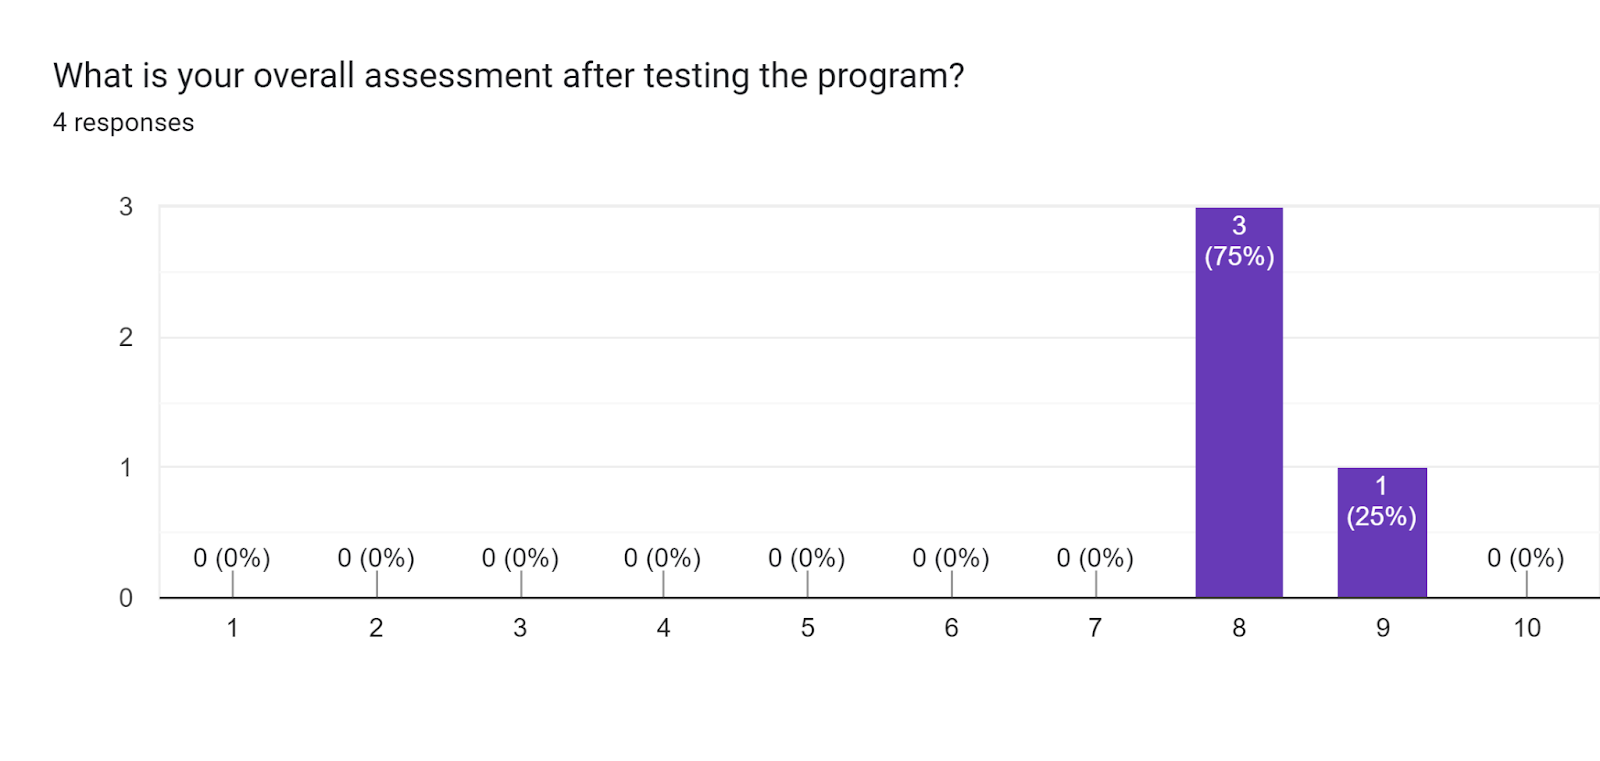 Forms response chart. Question title: What is your overall assessment after testing the program? . Number of responses: 4 responses.